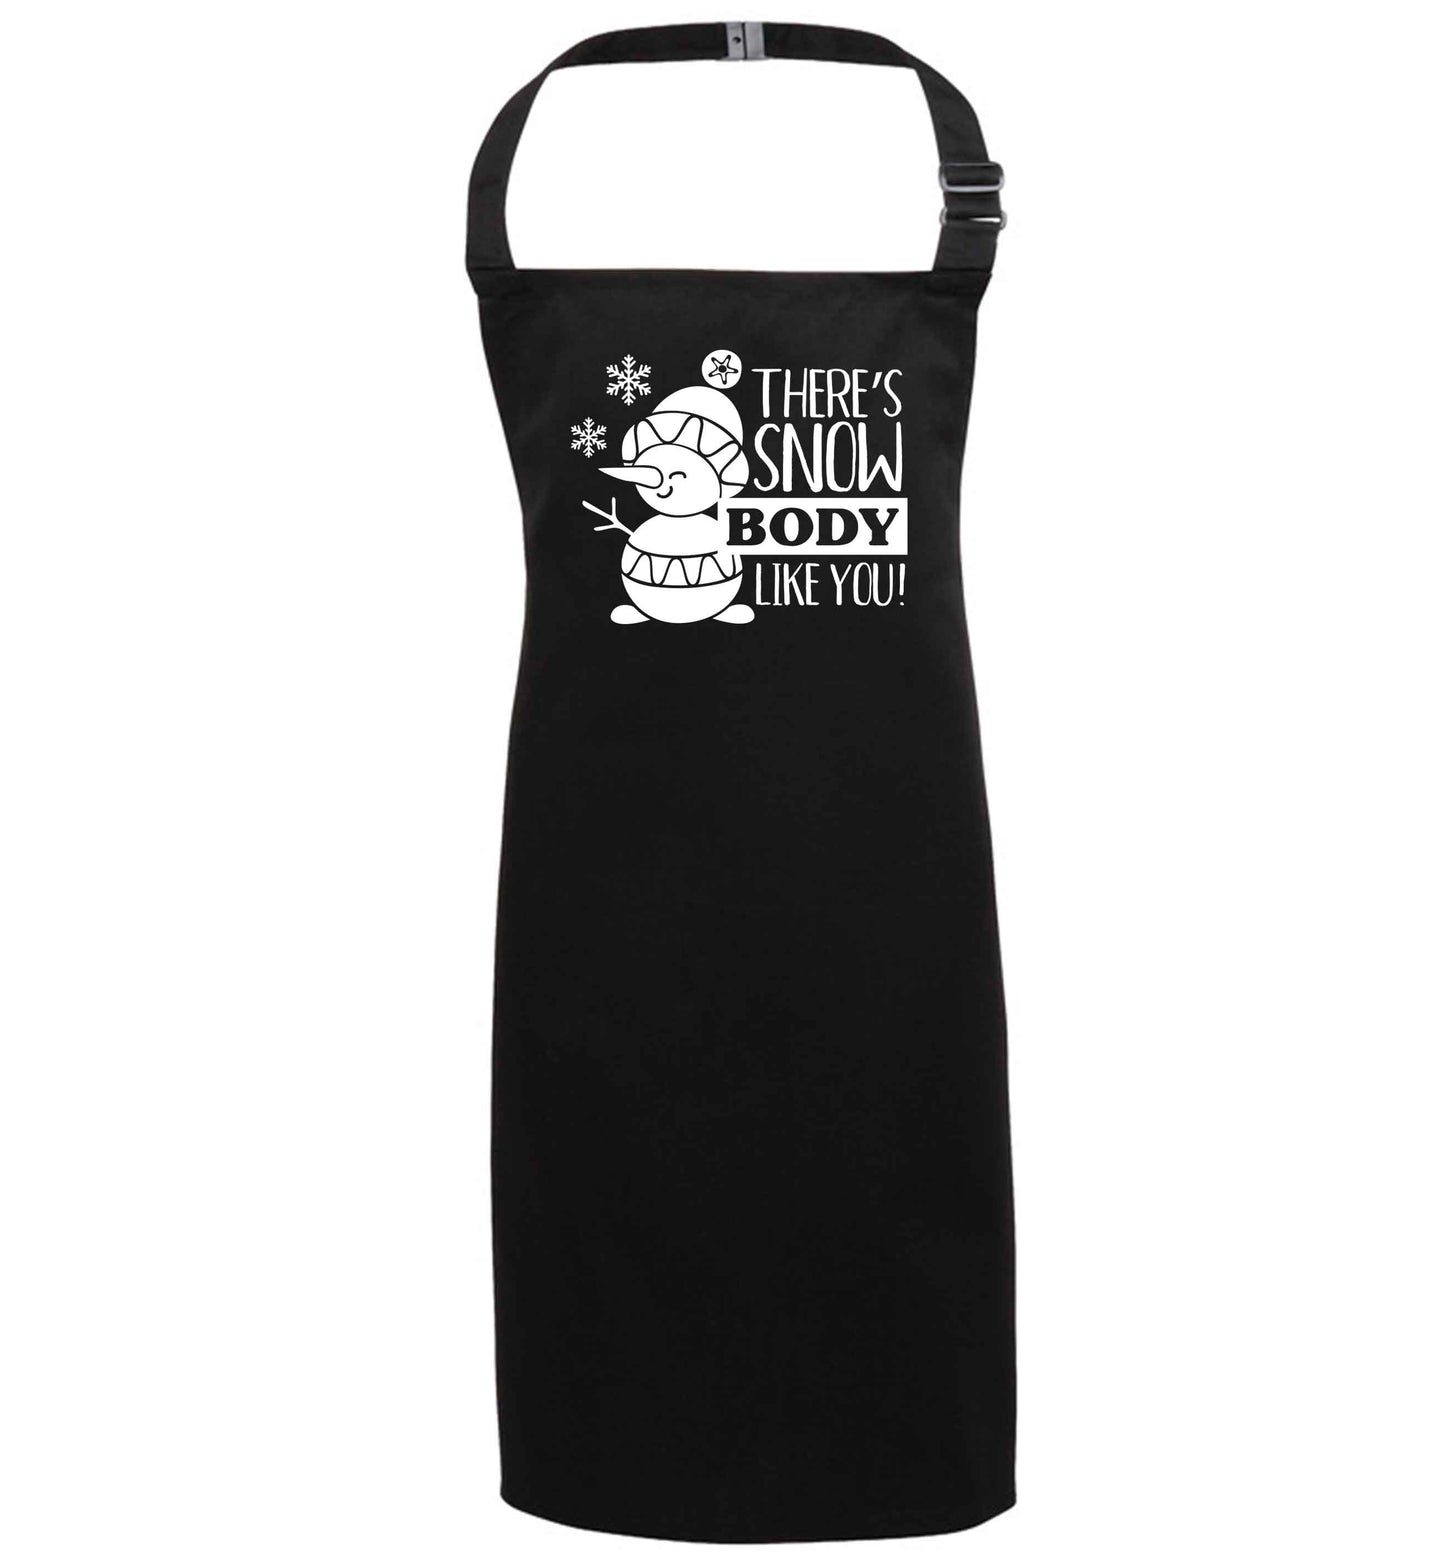 There's snow body like you black apron 7-10 years